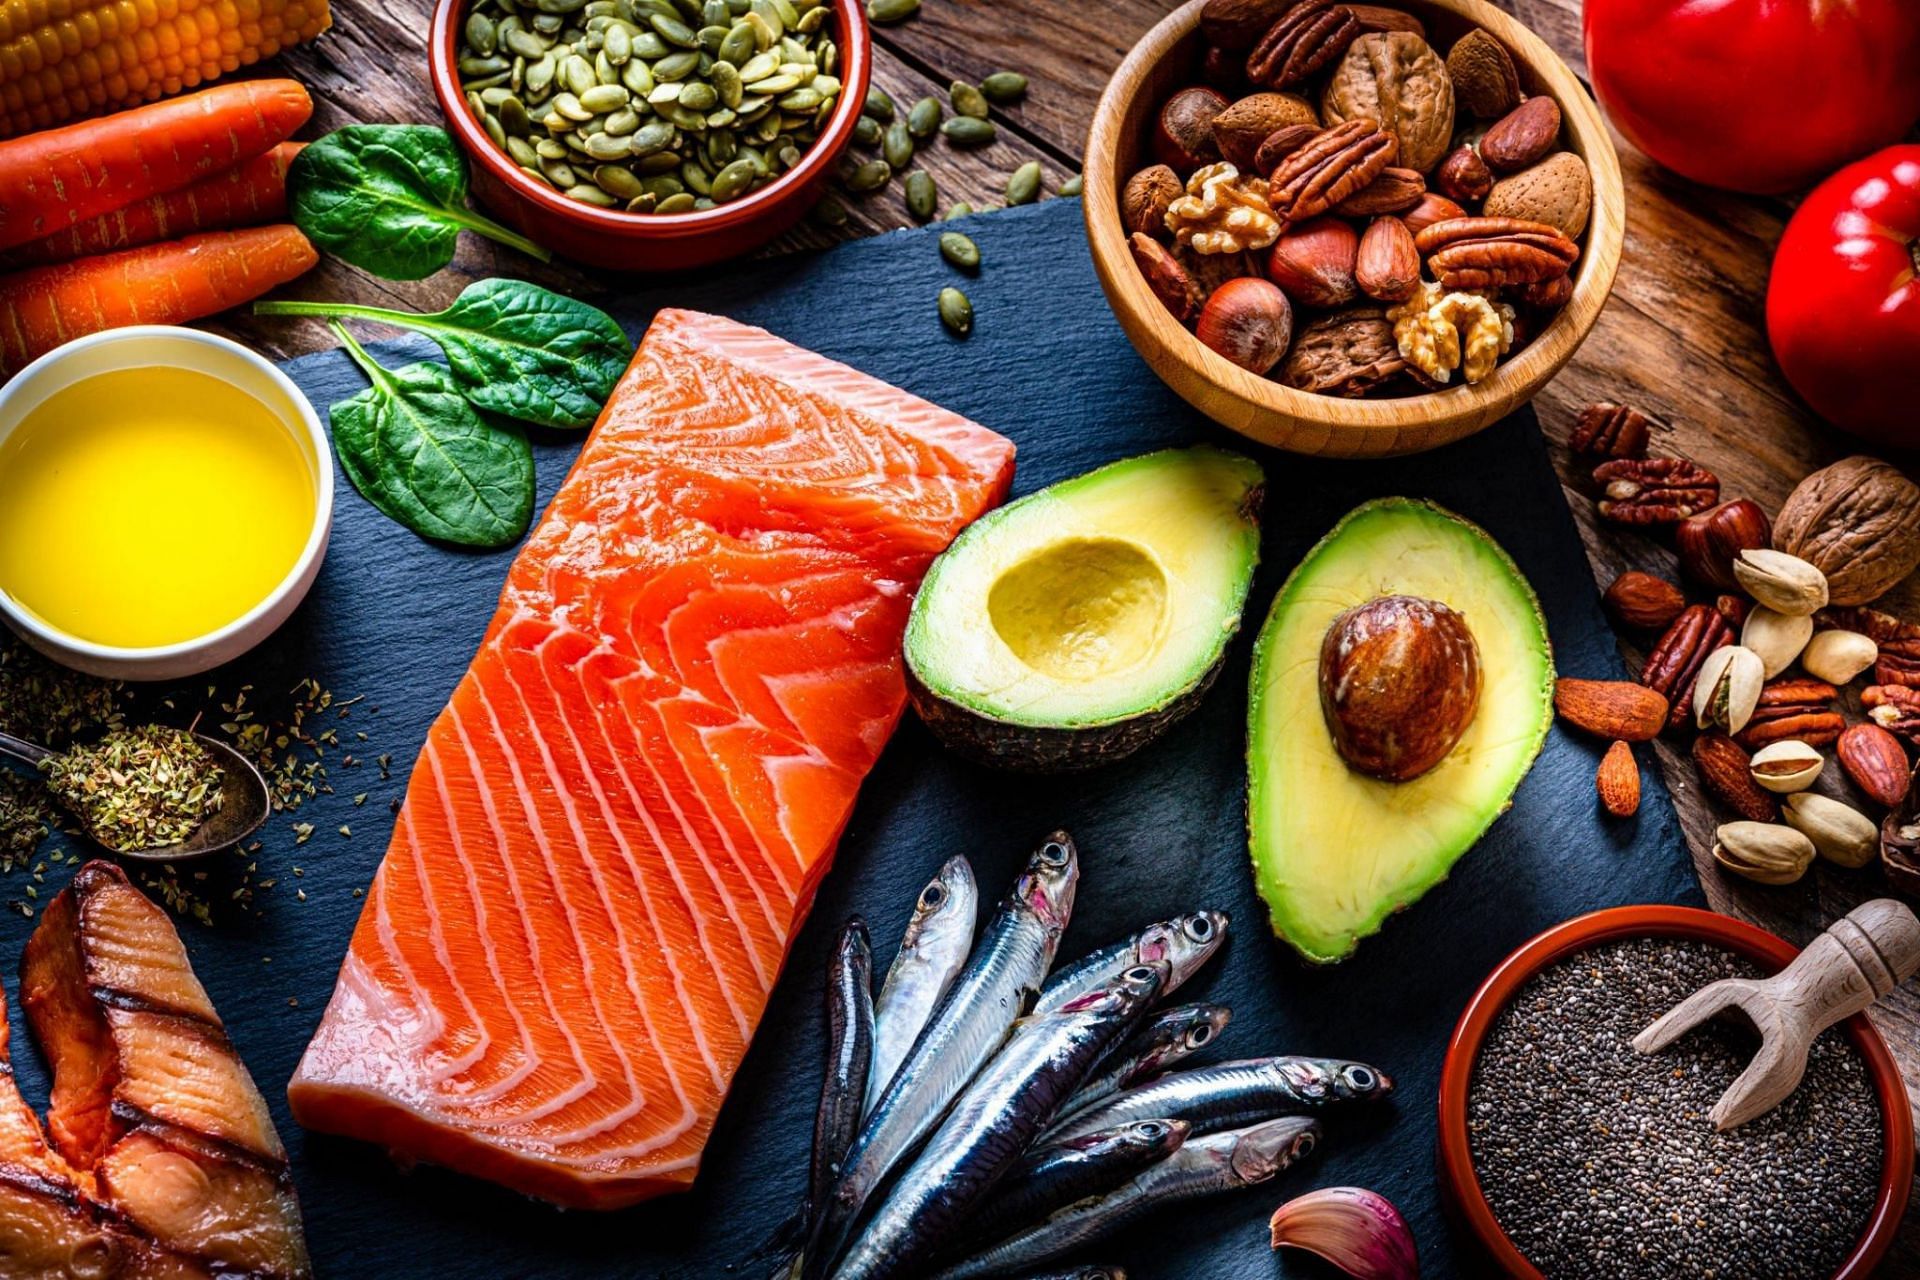 Foods with Omega-3s Fatty Acids